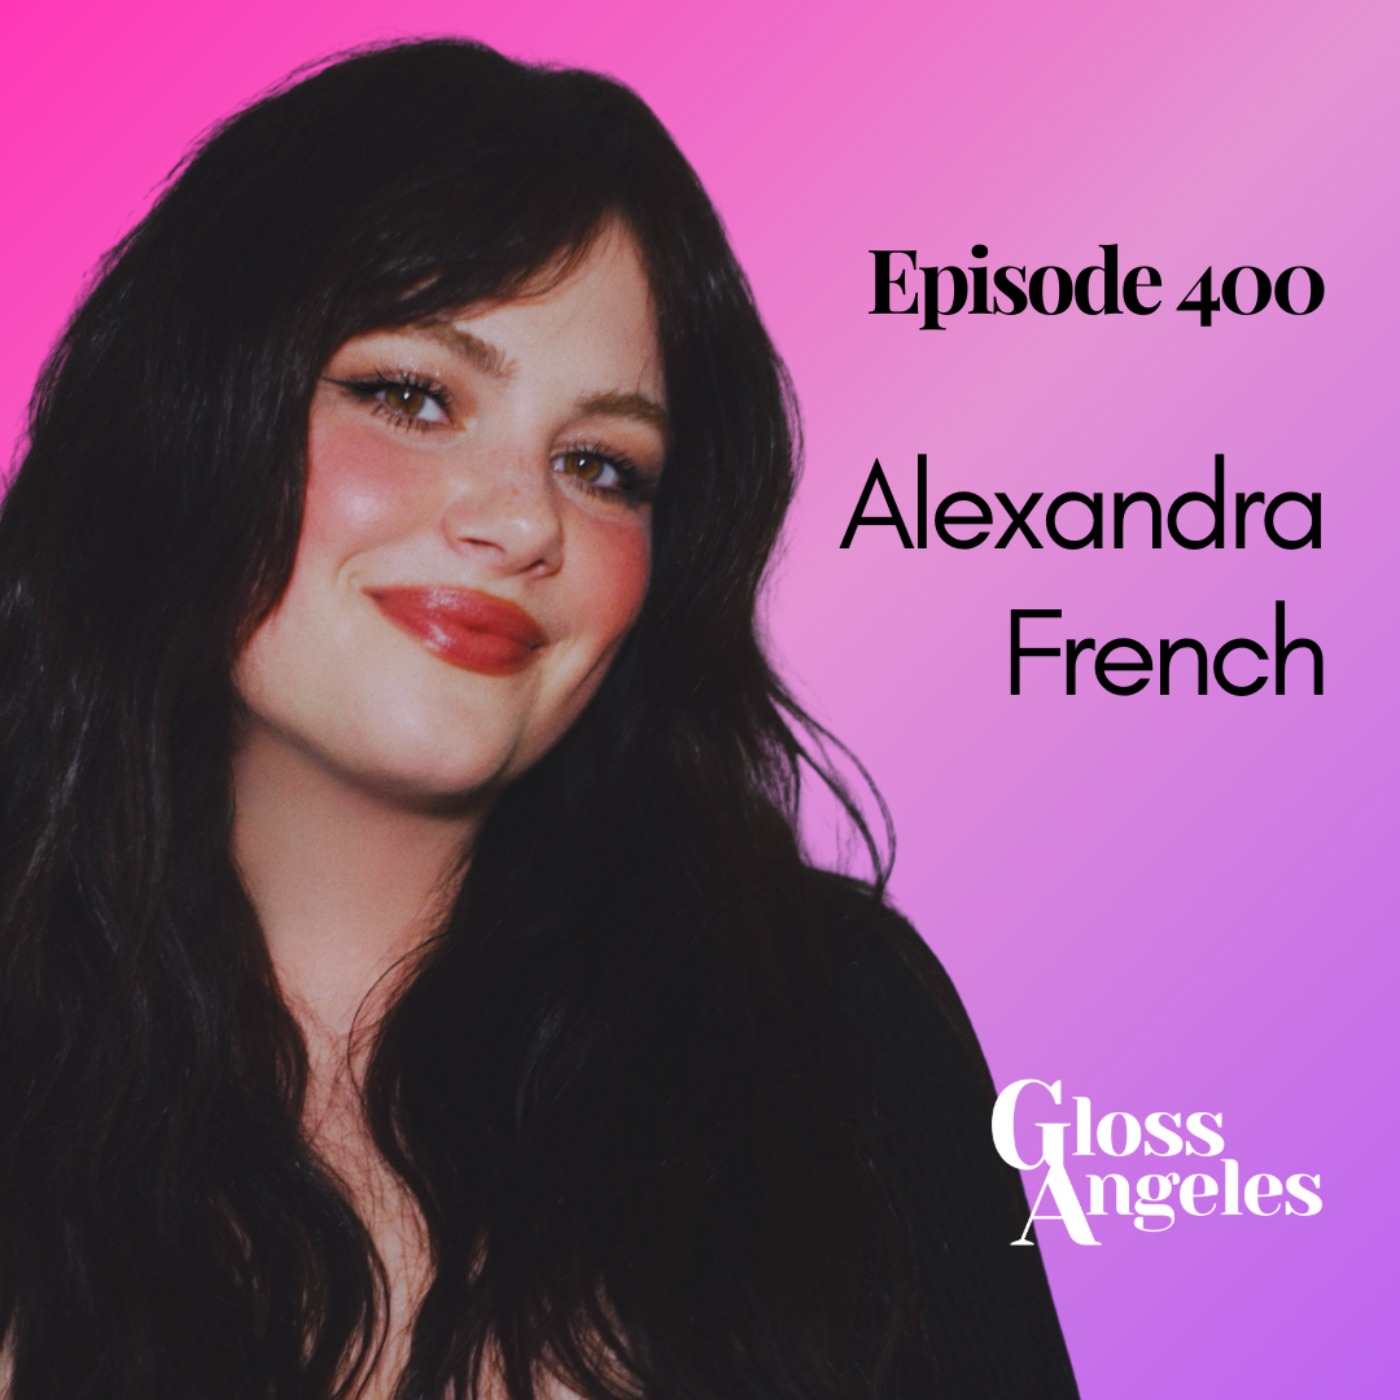 Alexandra French on Leaving Euphoria, Industry Politics and the Makeup Products She Doesn't Use on Herself